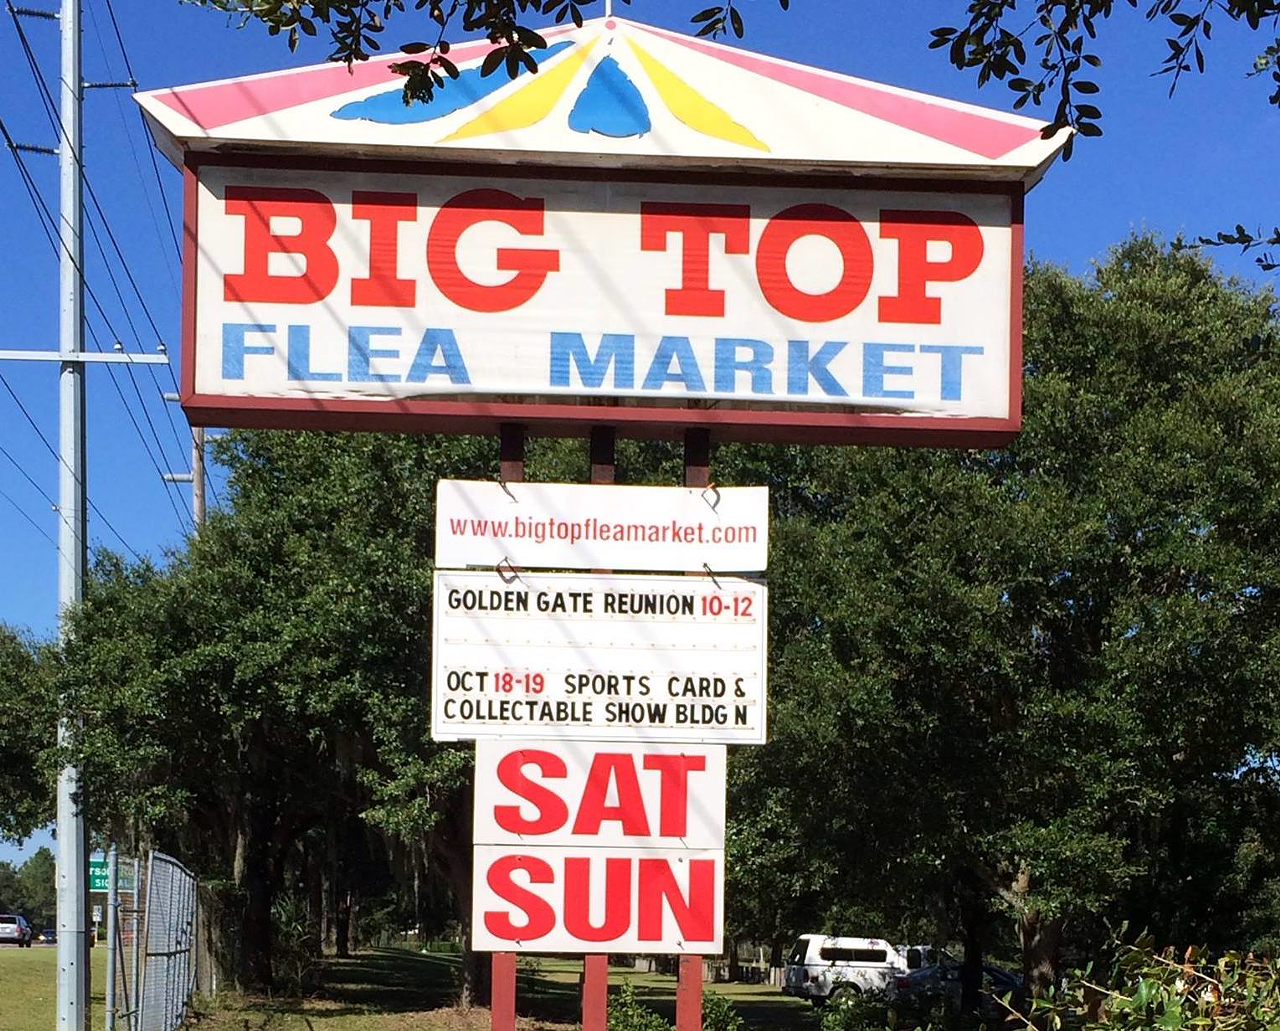 Big Top Flea Market
Let’s just say the pandemic was not kind to flea markets. Big Top was the go-to spot for those looking to spend a lazy weekend day searching for knick knacks and bartering deals on sports cards. After 26 years of selling treasures to Tampa locals, the market was shut down in 2020. And you guessed it, townhouses are set to pop up on the property. 
Photo via Big Top Flea Market/Facebook